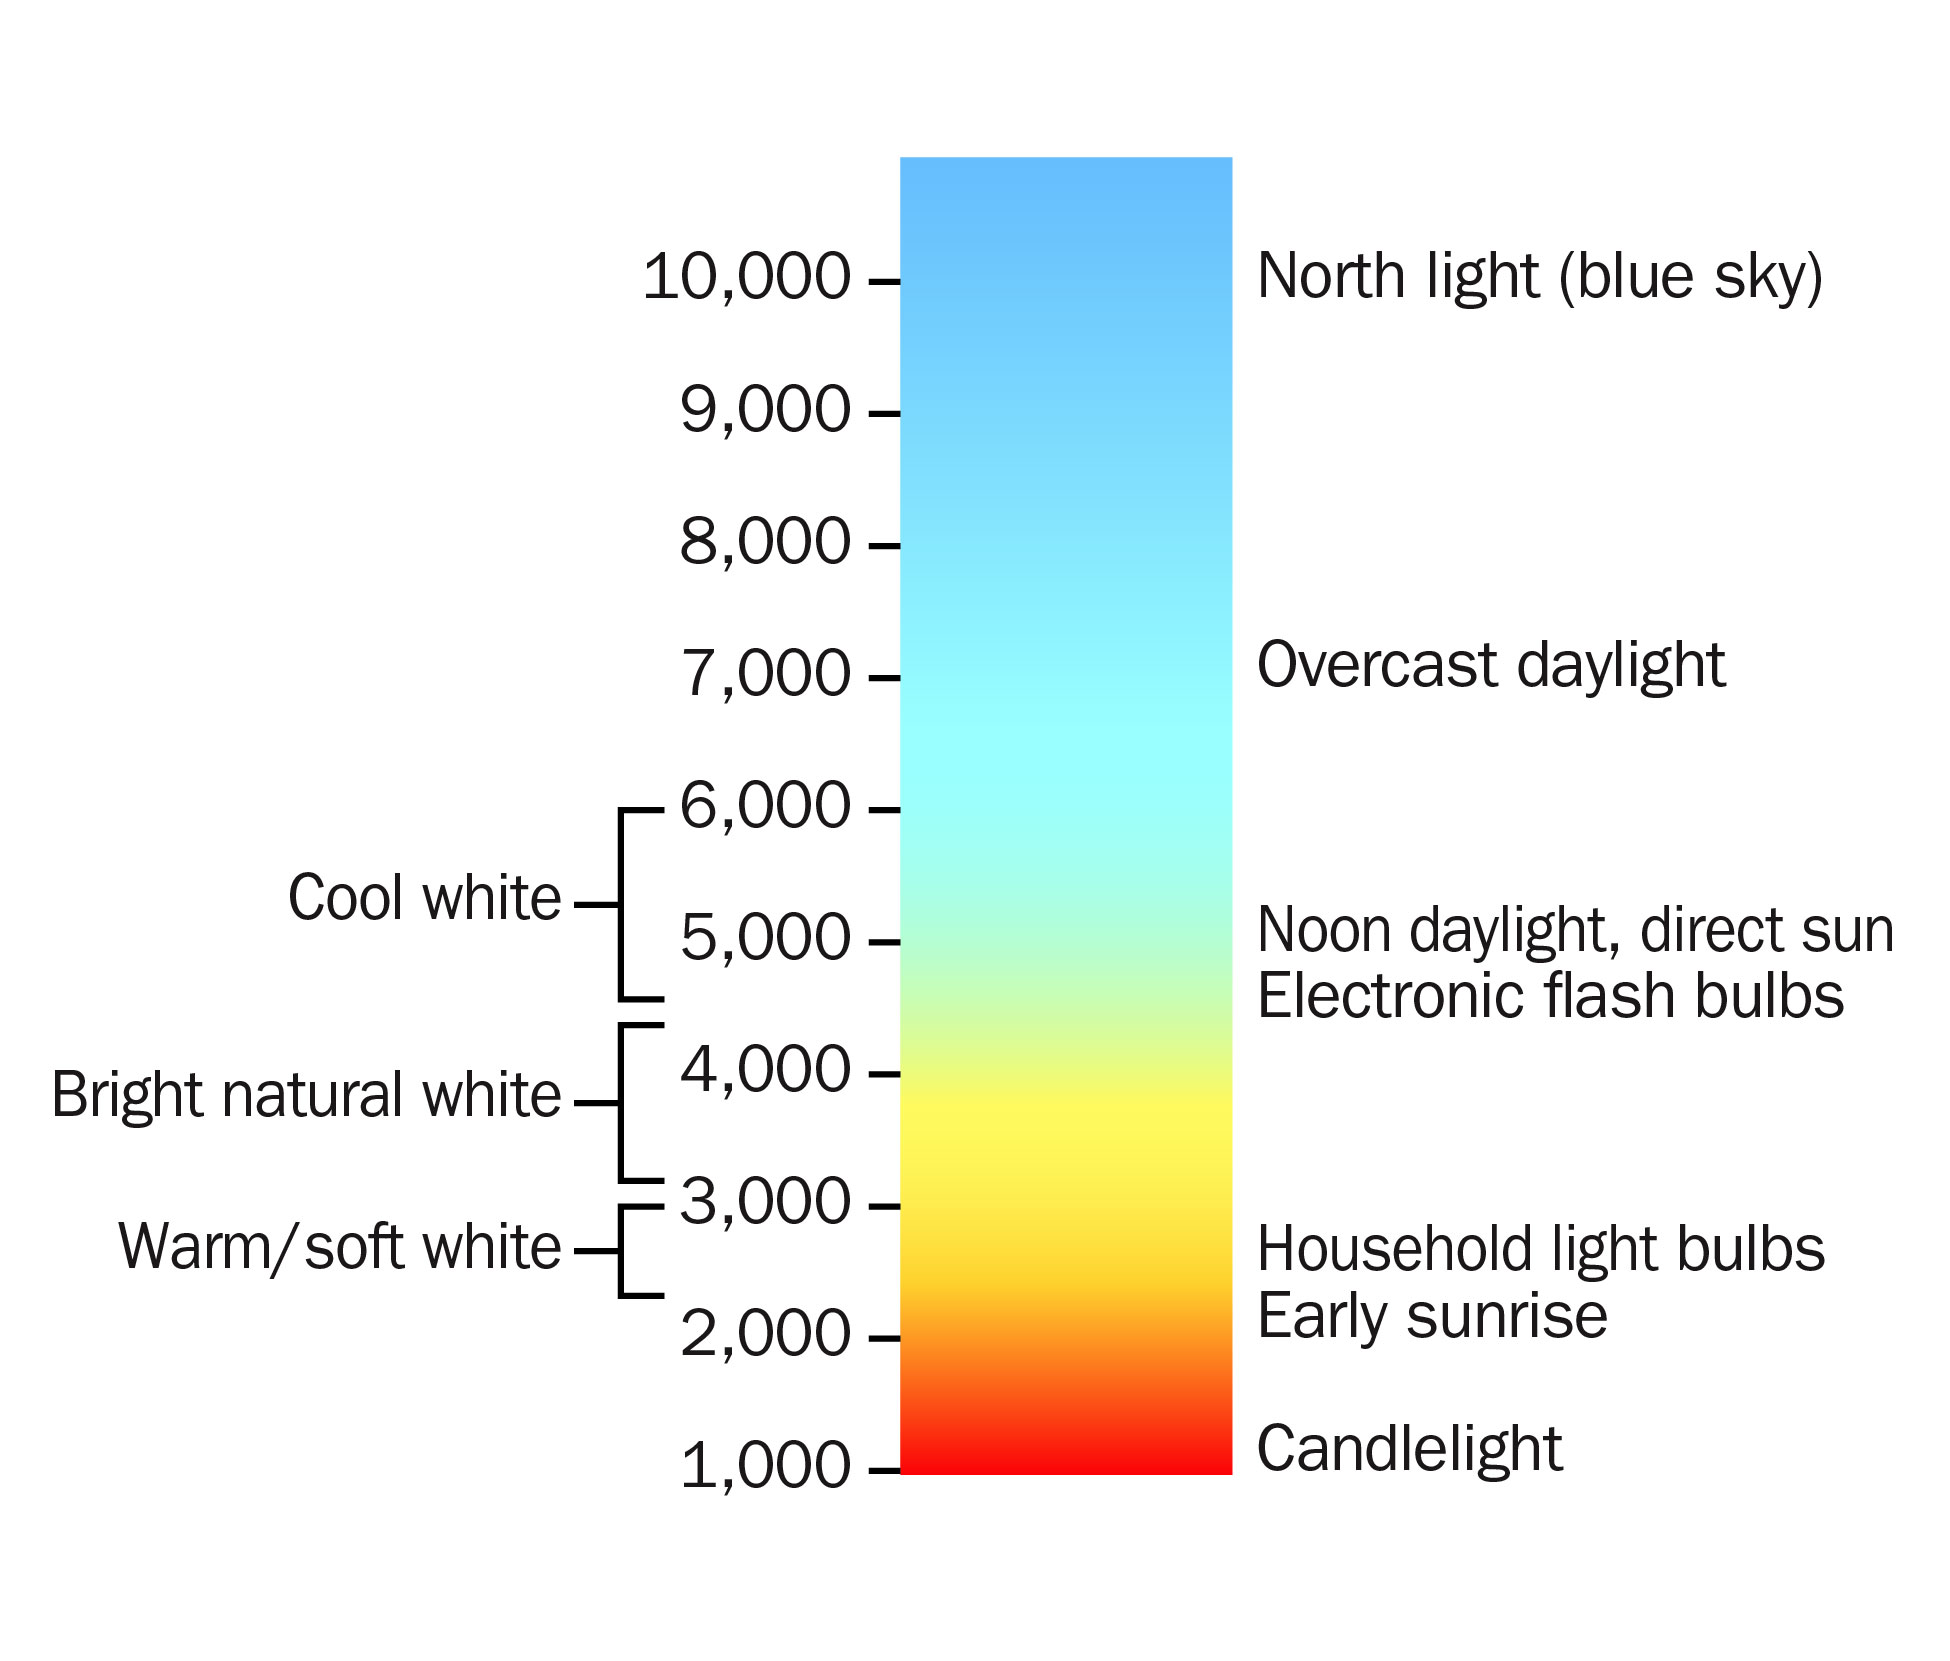 Diagram shows the various colour temperatures using the Kelvin scale. The scale starts at the bottom with an orange red light equivalent of 1,000K  and moving up to a bright blue colored light having a rating of 10,000K.